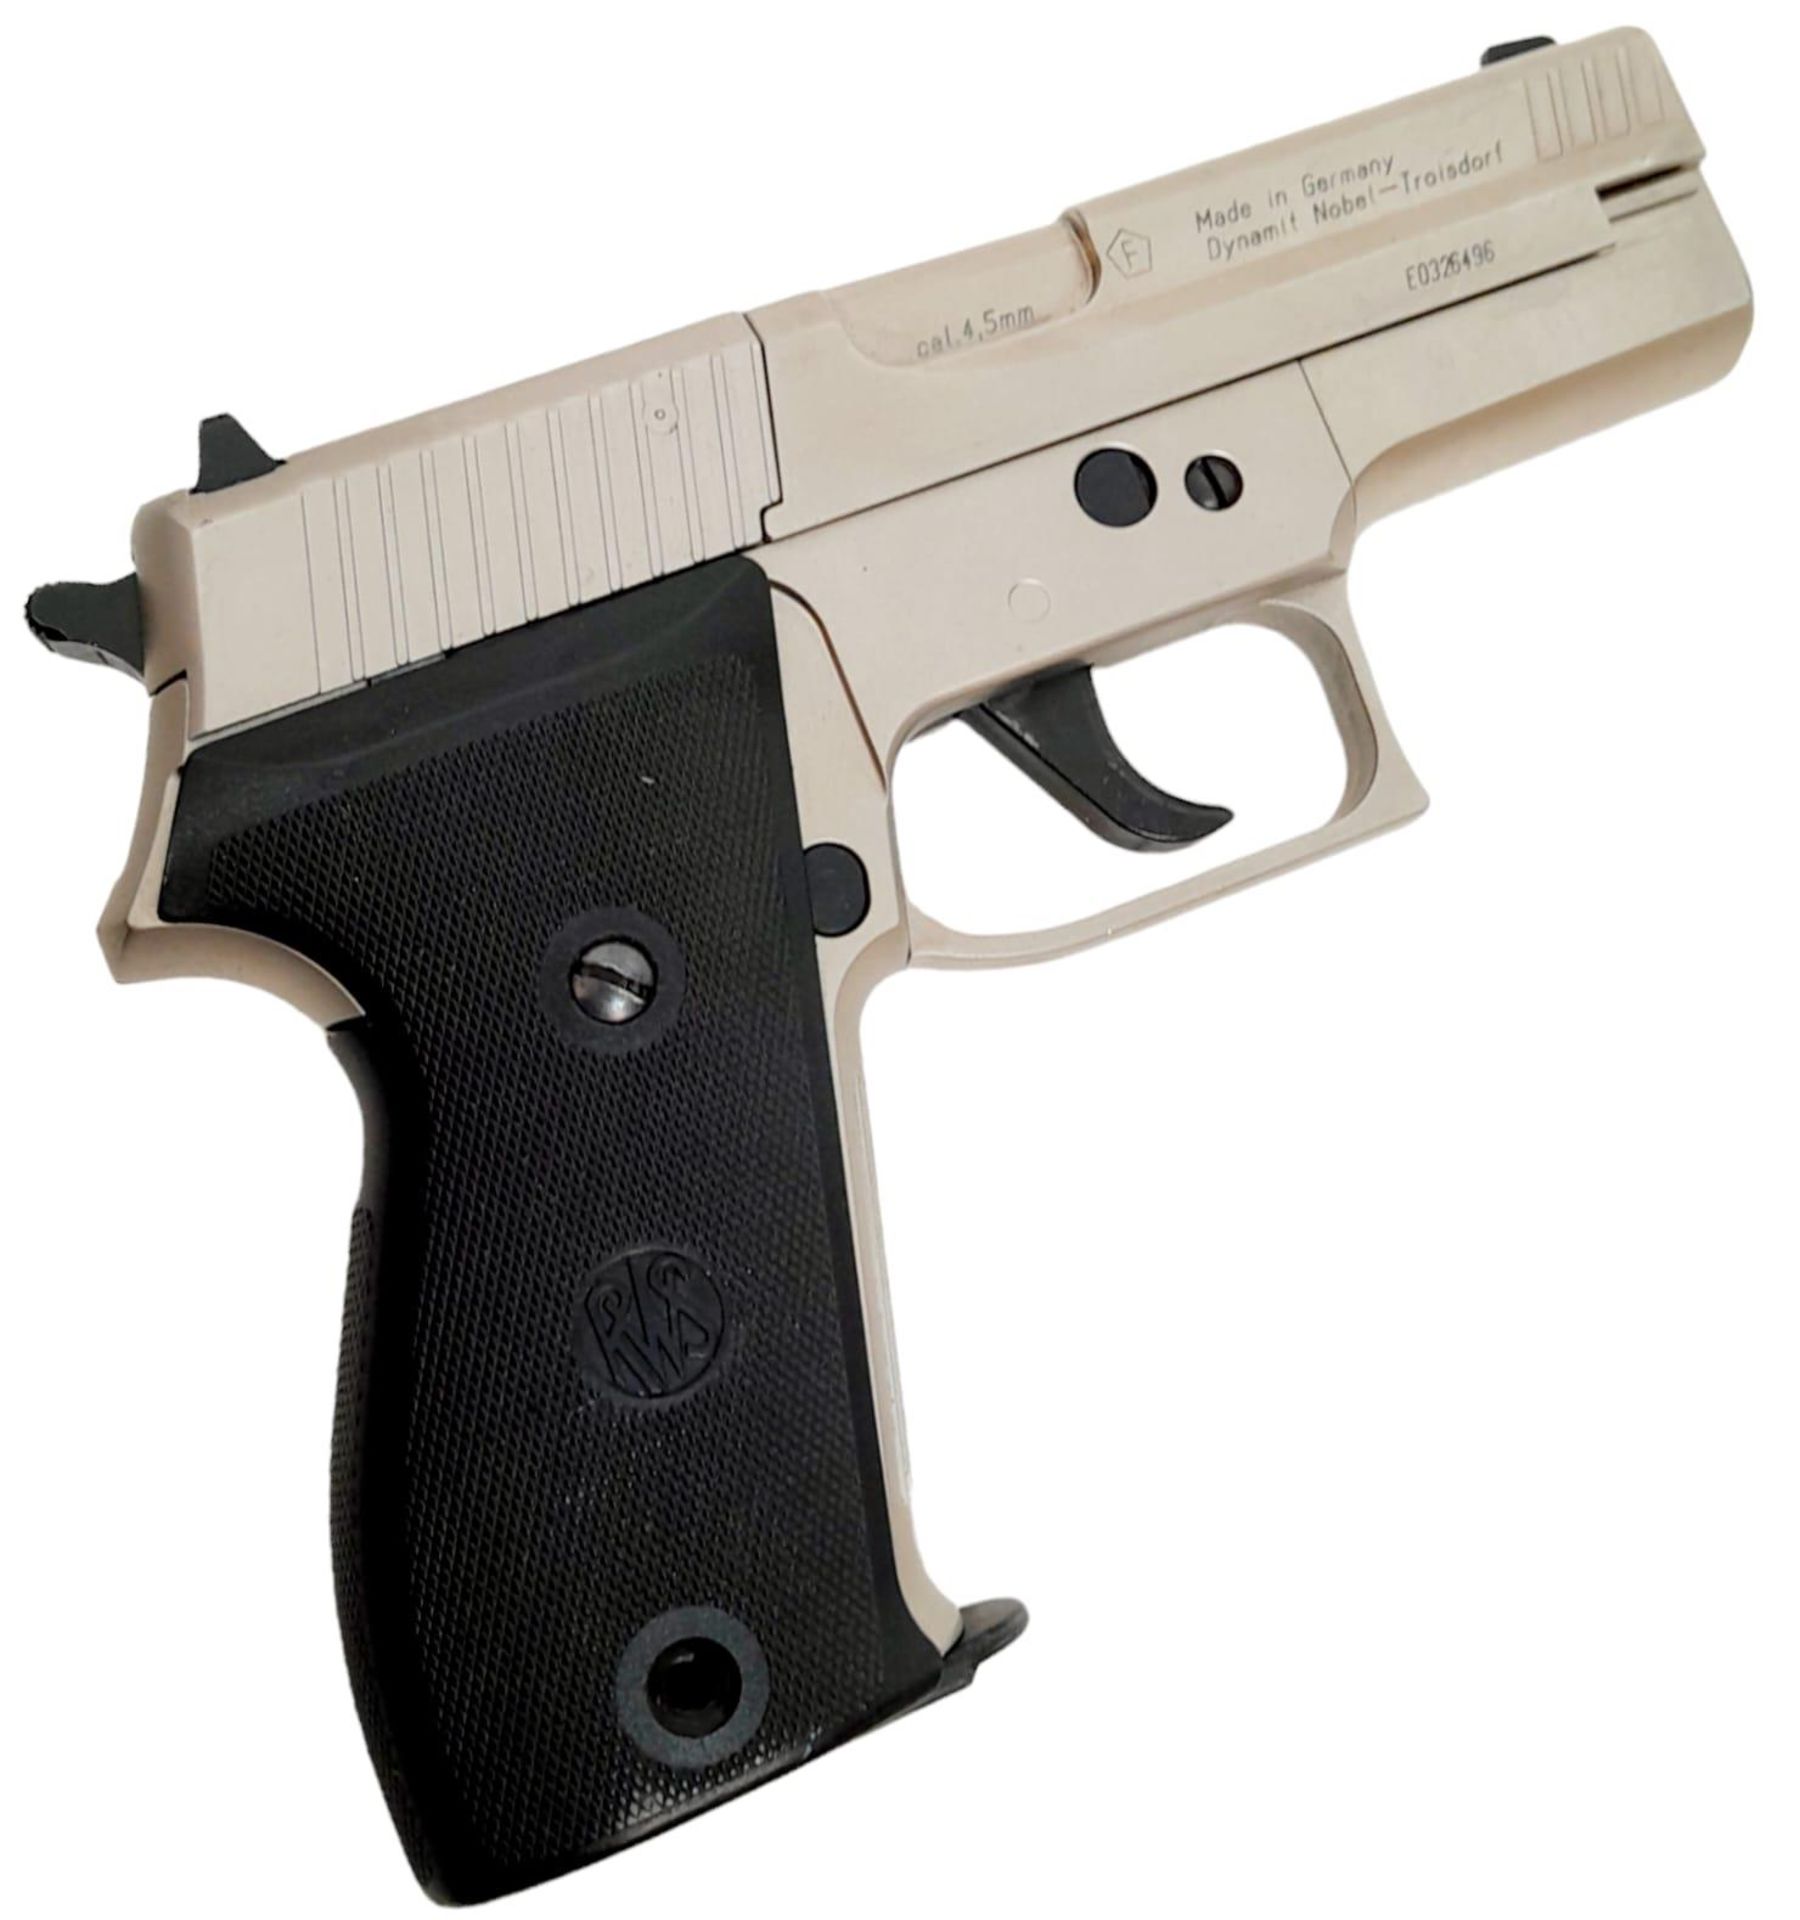 A RWS Co2 Powered .177 Pellet Air Pistol Model 225. Complete with Pellets, Two Magazines, Manual and - Image 5 of 11